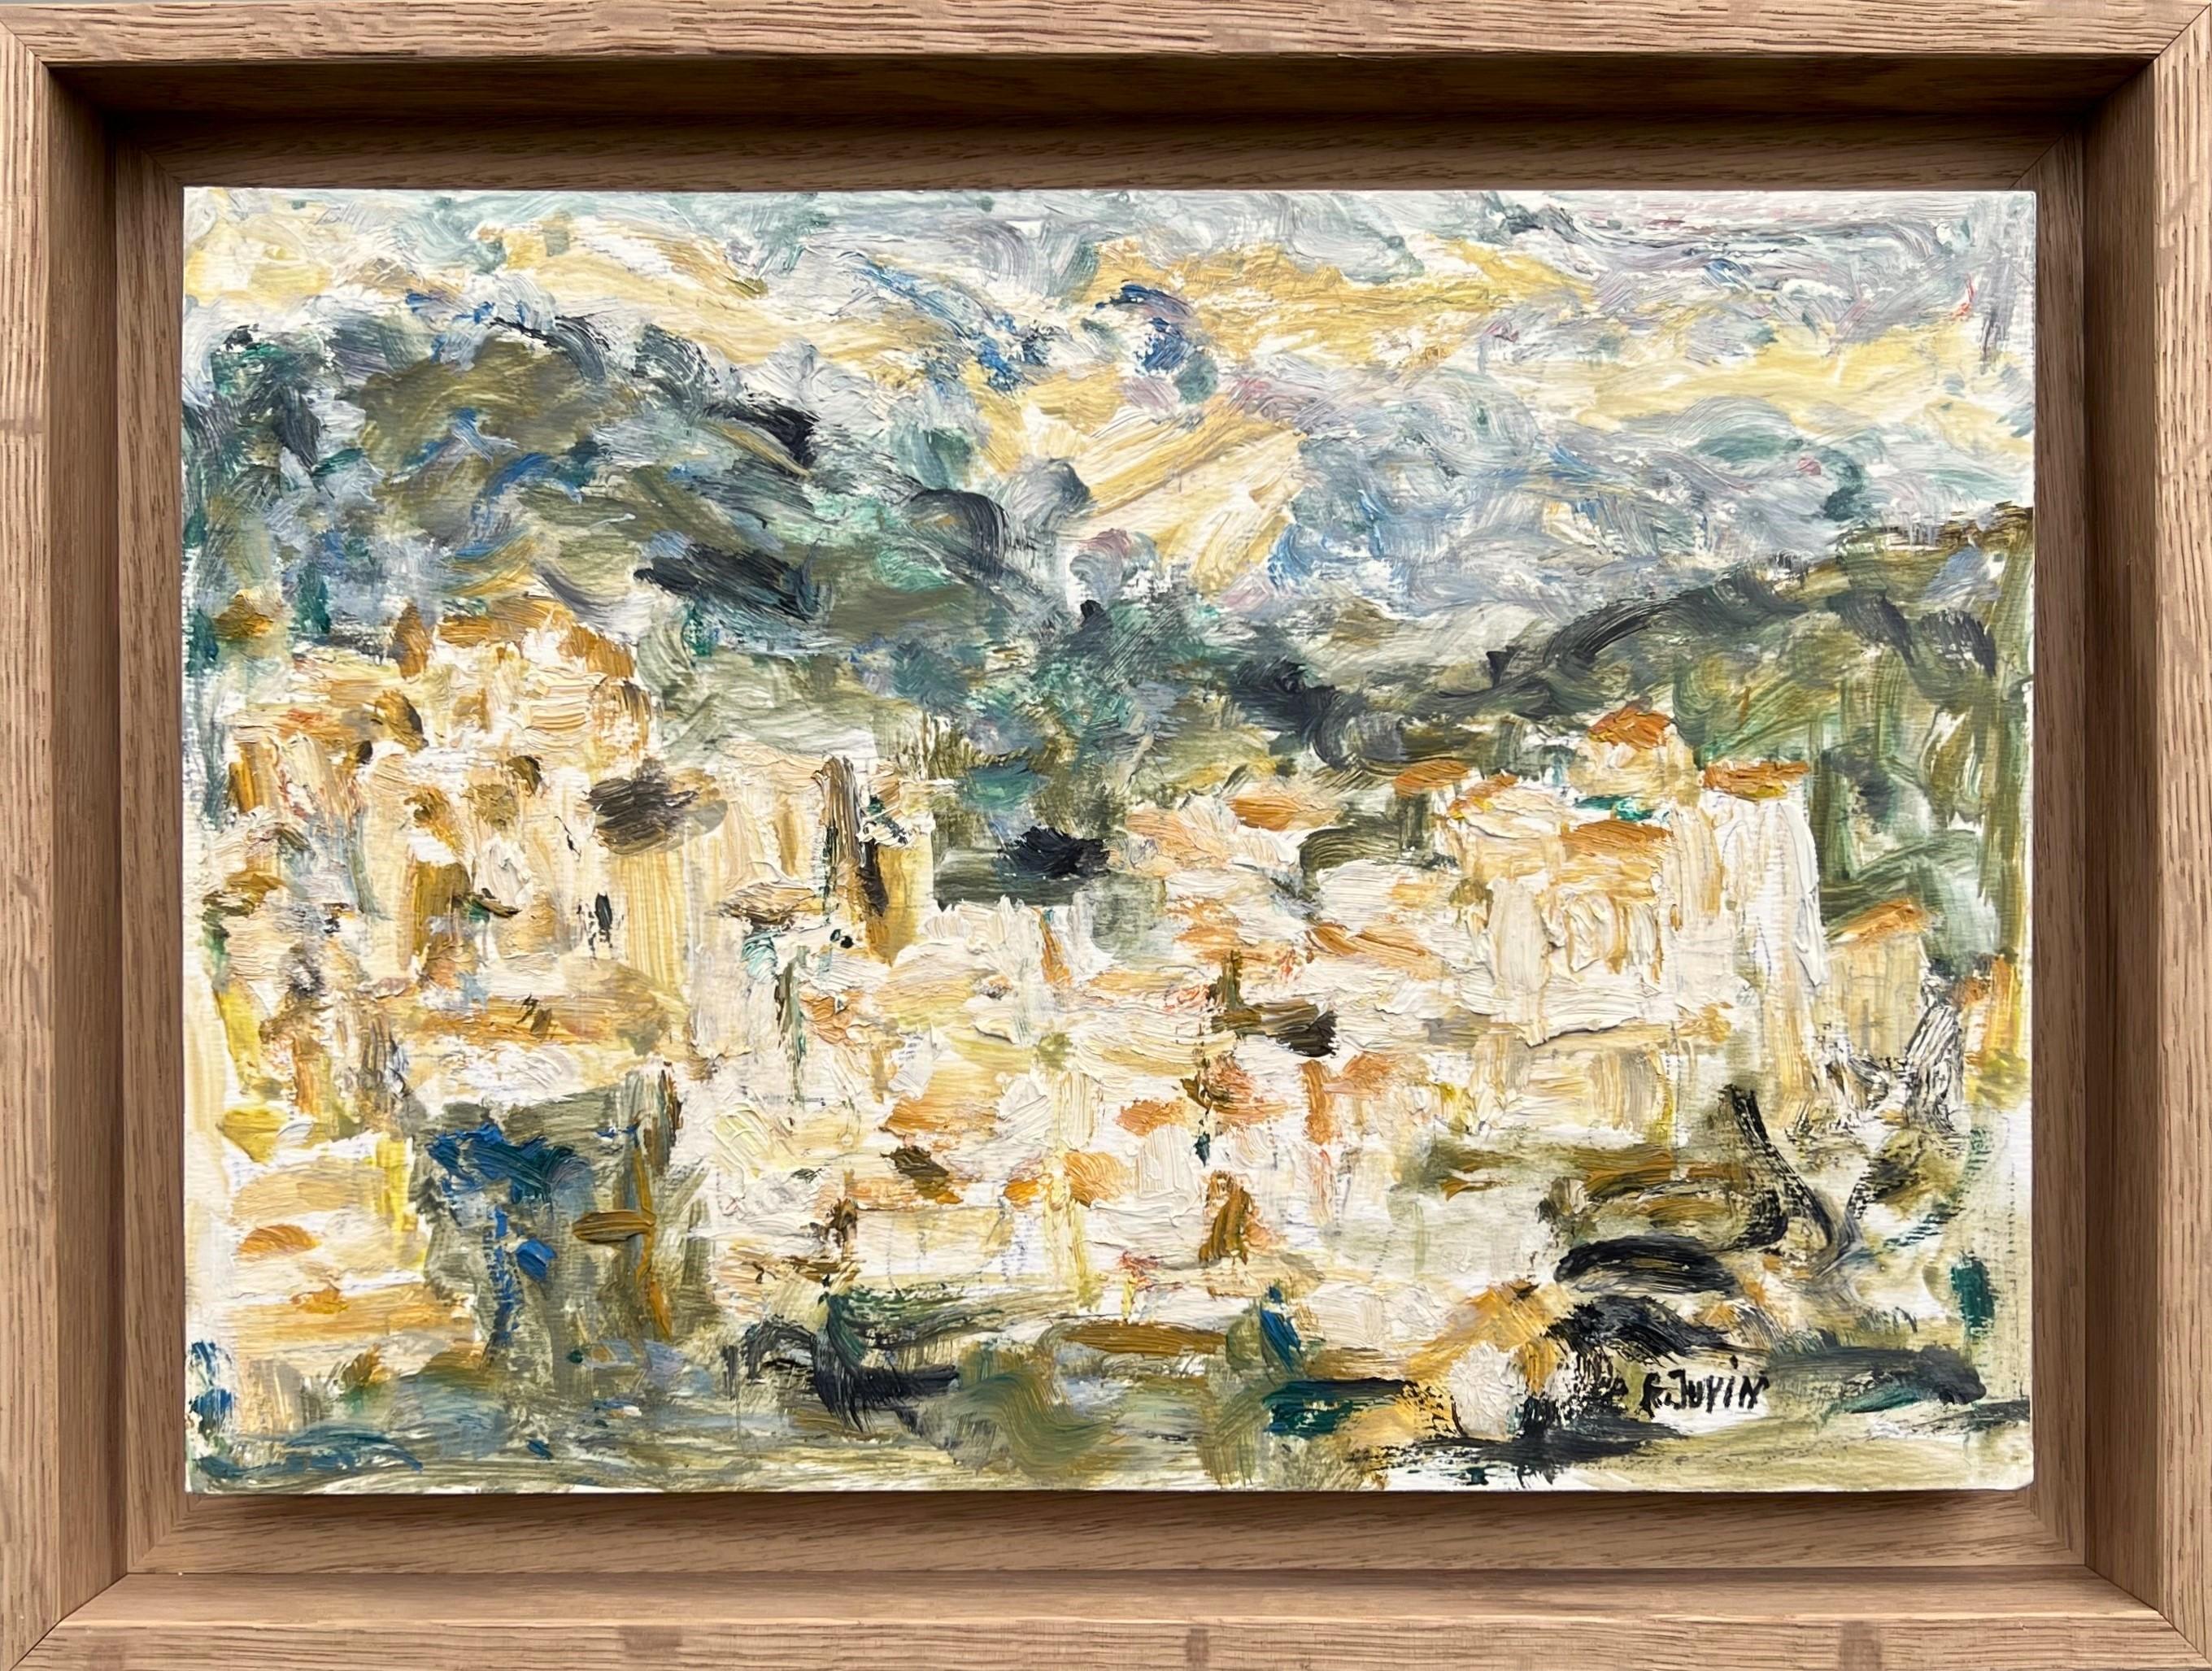 Françoise Juvin - Village in French Provence
Reference number FJ19
Framed with a natural oak floated frame.
24 x 32 cm frame included (18 x 26 cm without frame)
This work is painted with oil on a paper that is mounted on a board and placed in a made